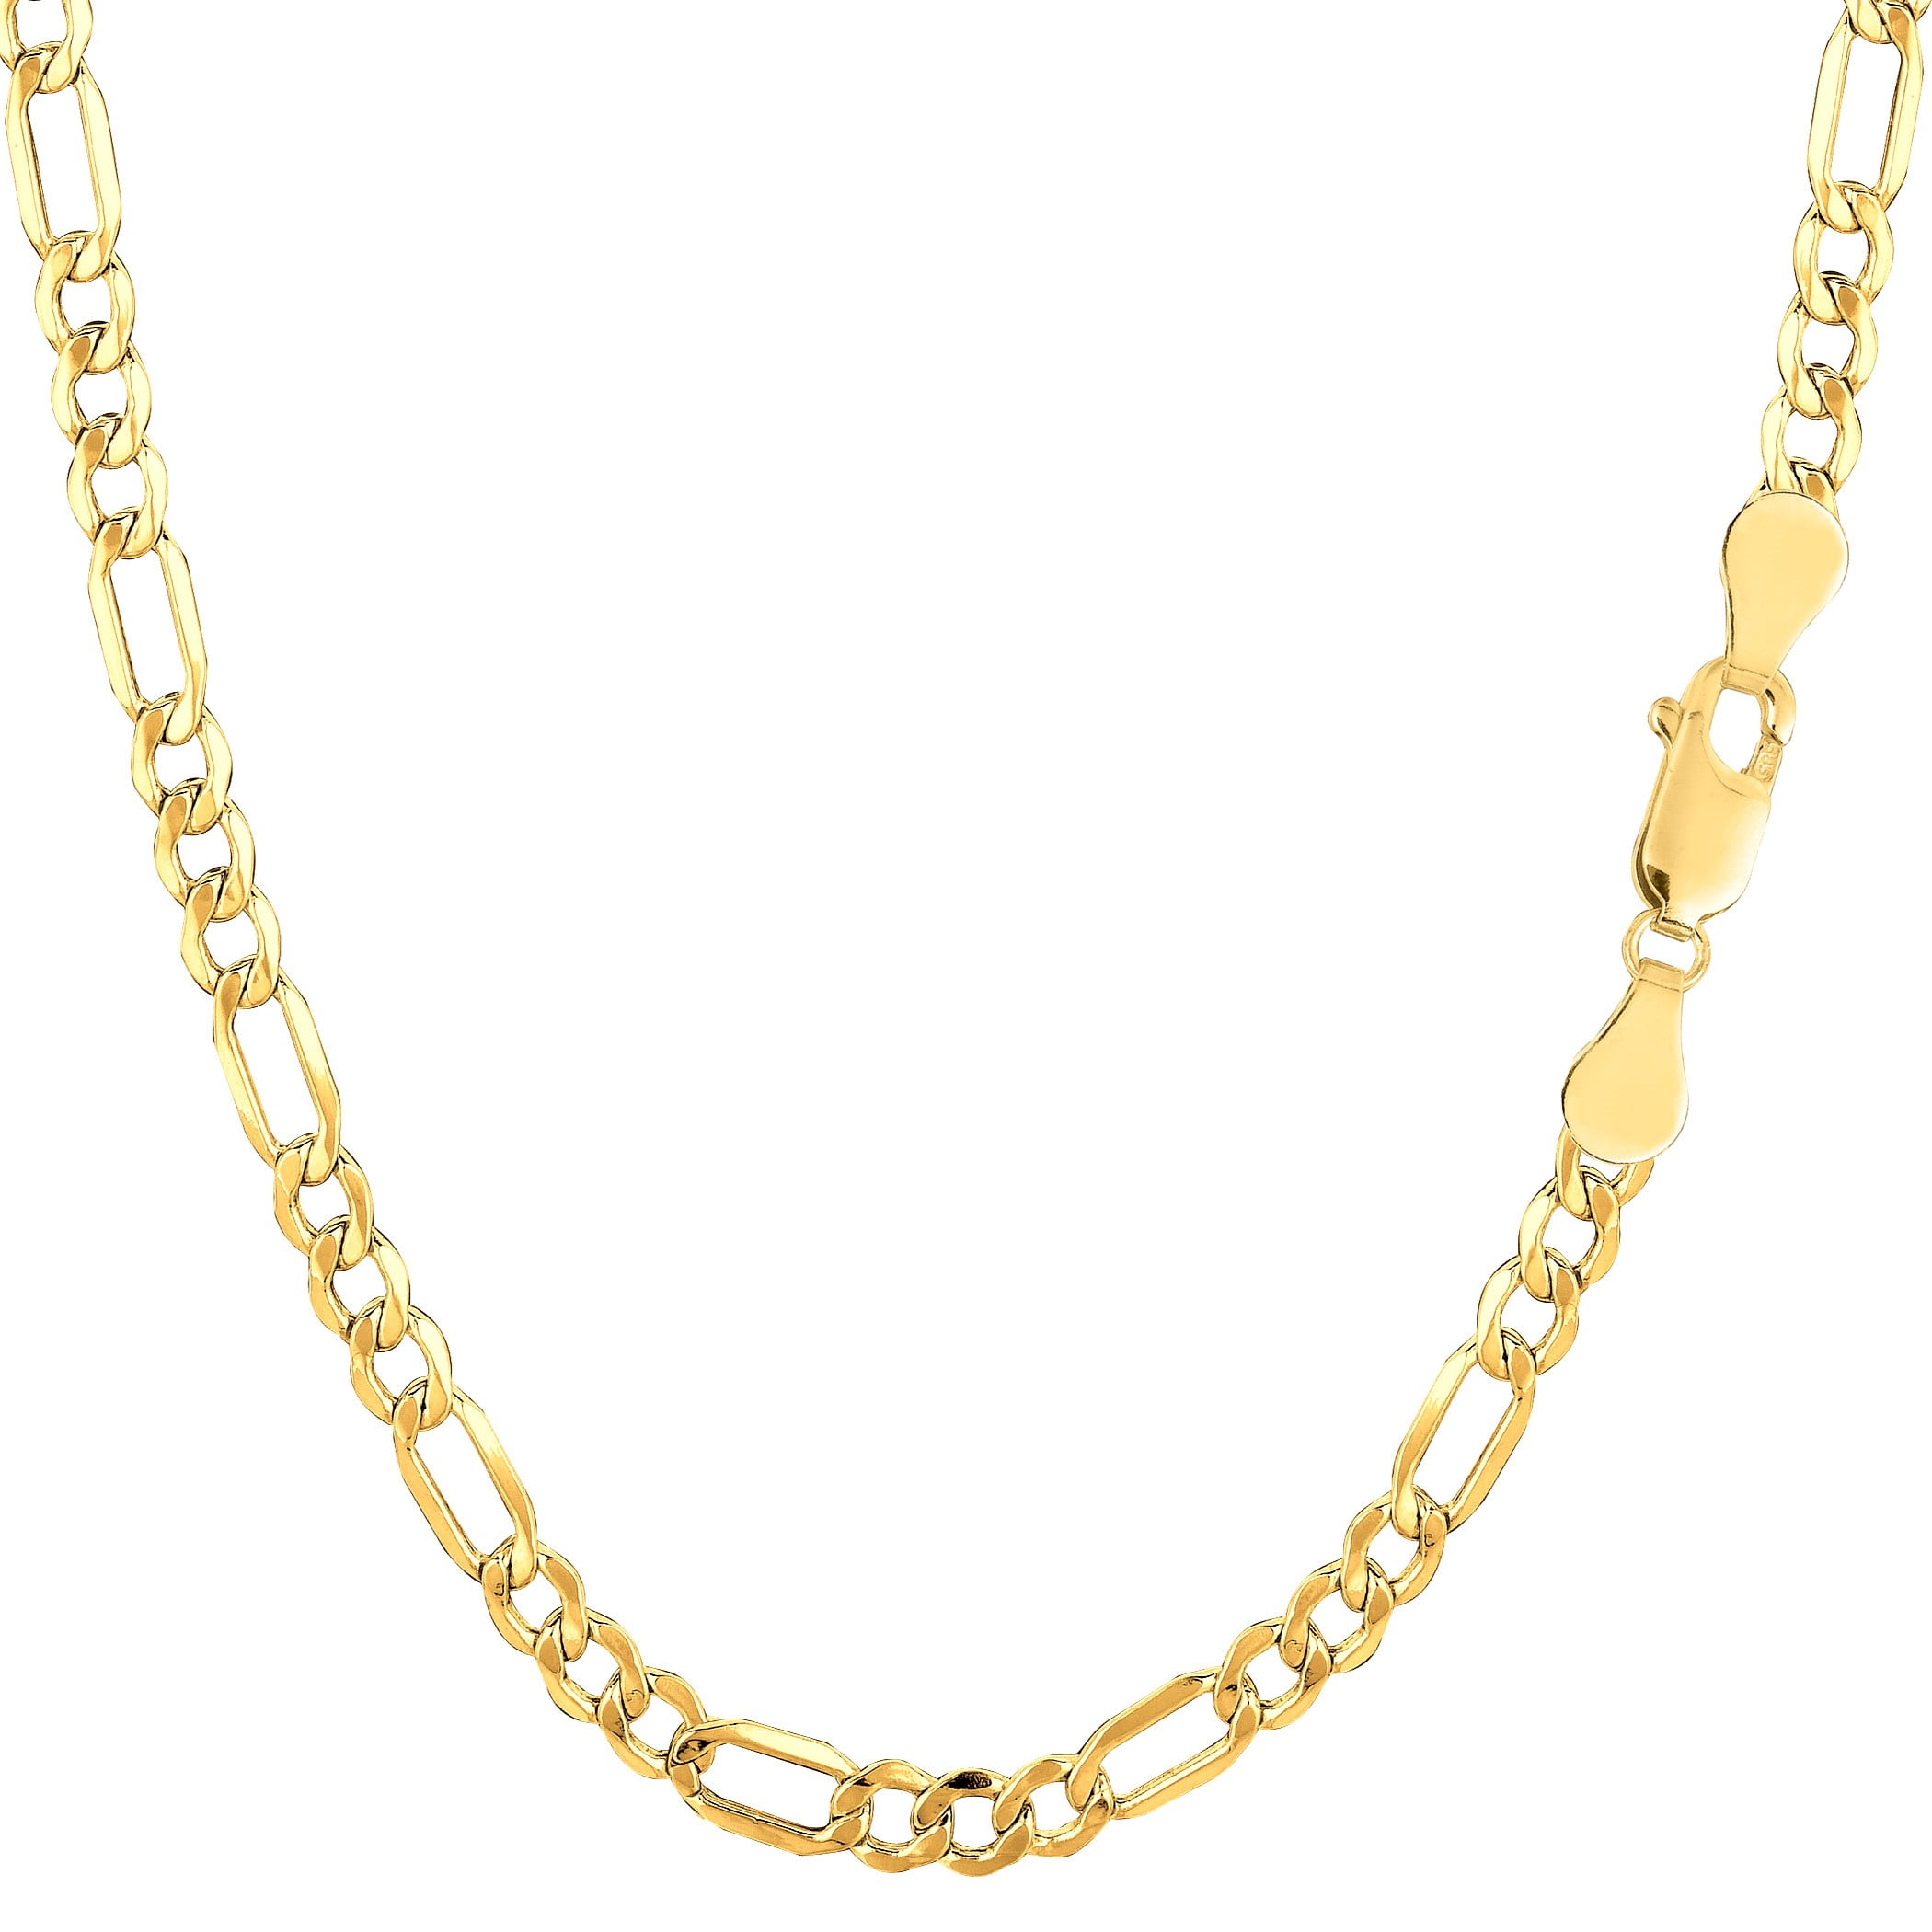 Sonia Jewels 14k Yellow Gold Figaro White Pave Chain Necklace With Lobster Claw Clasp